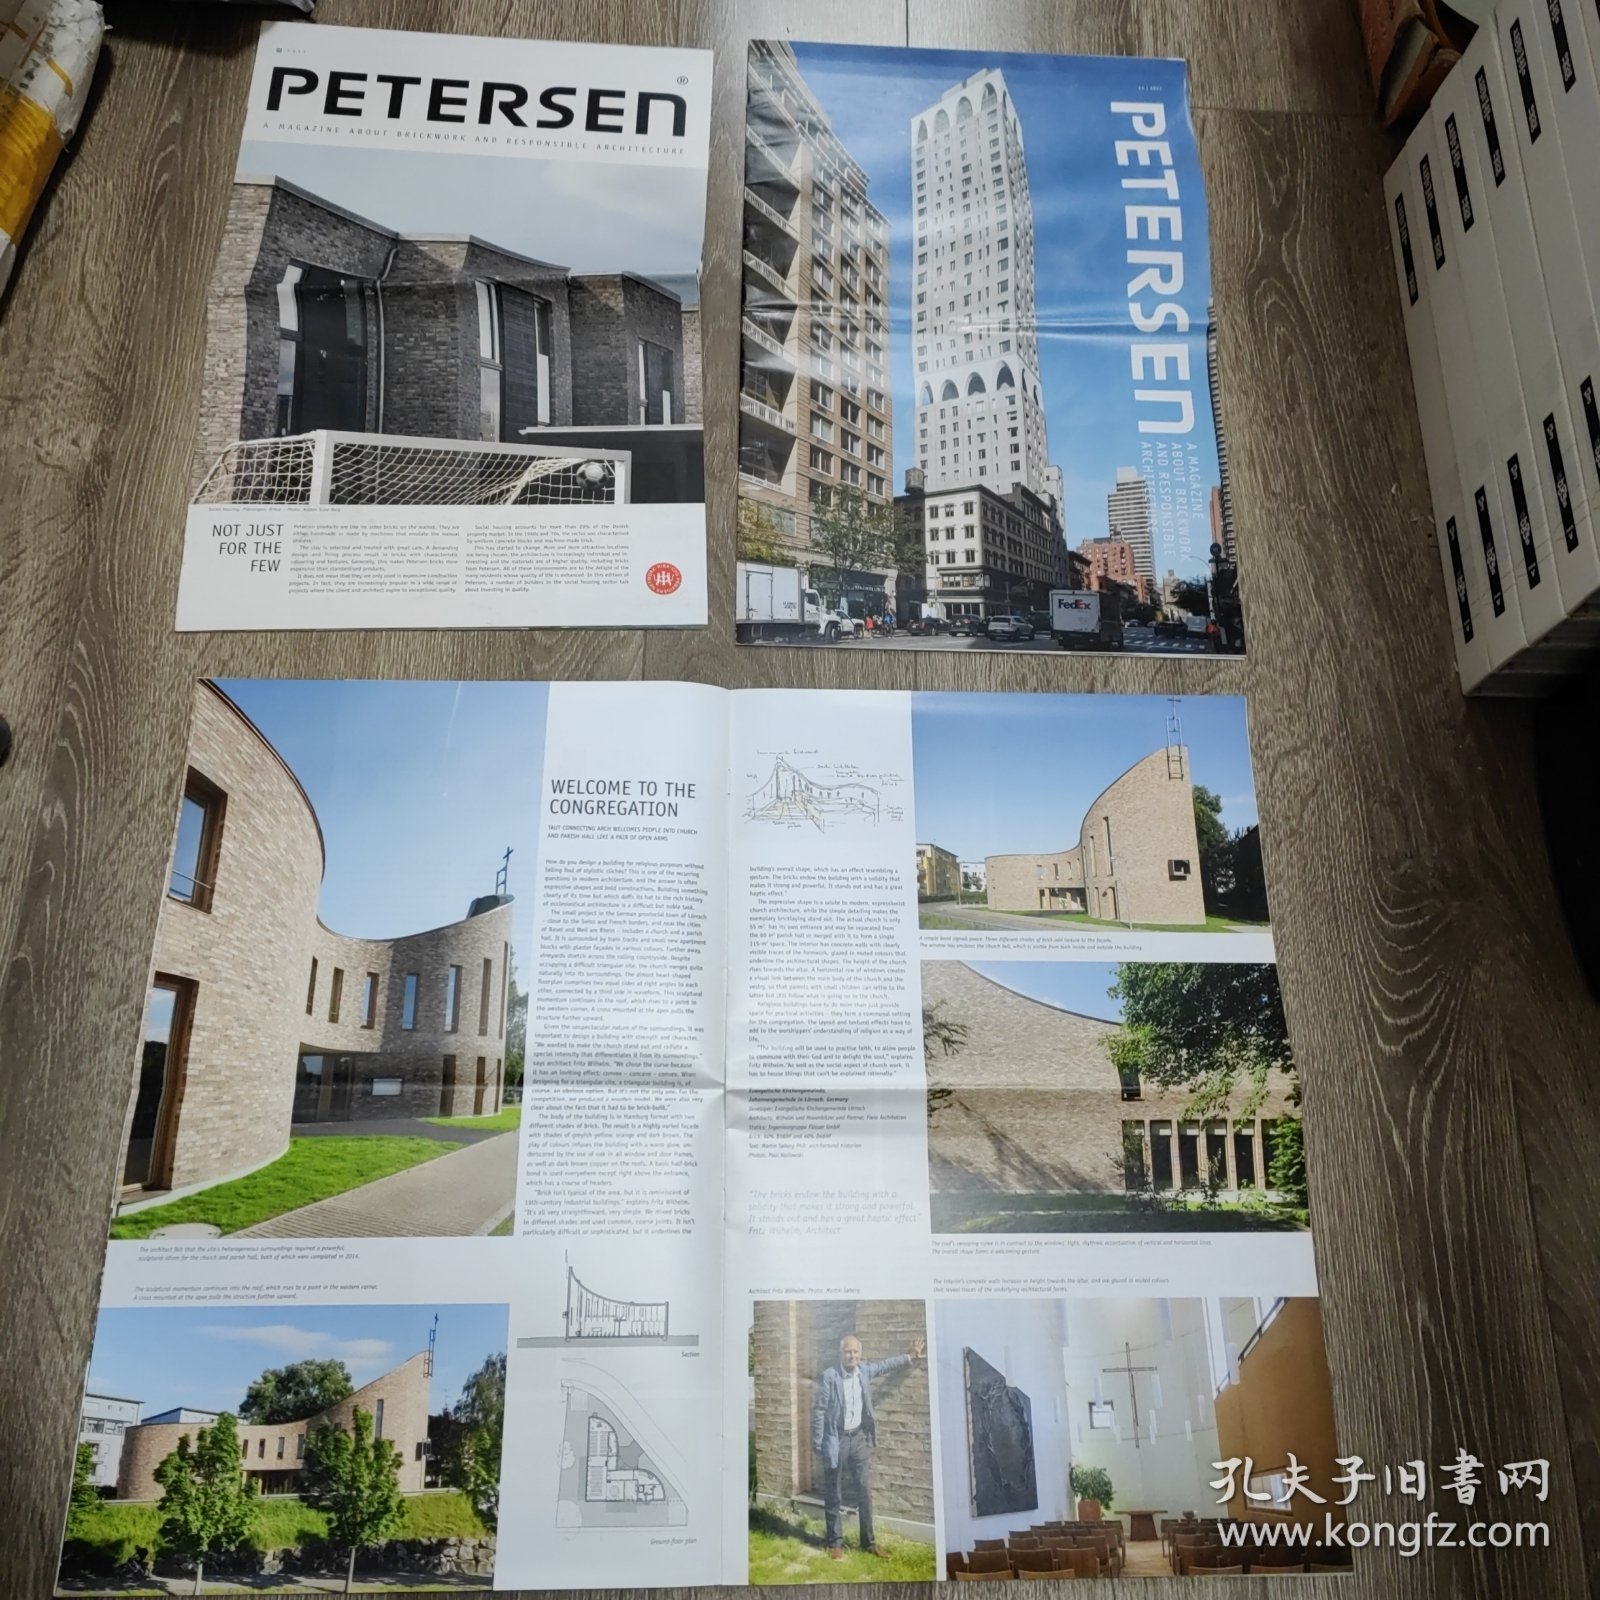 PETERSEN A MAGAZINE ABOUT BRICKWORK AND RESPONSIBLE ARCHITECTURE 44/2021+33/2015+28/2013